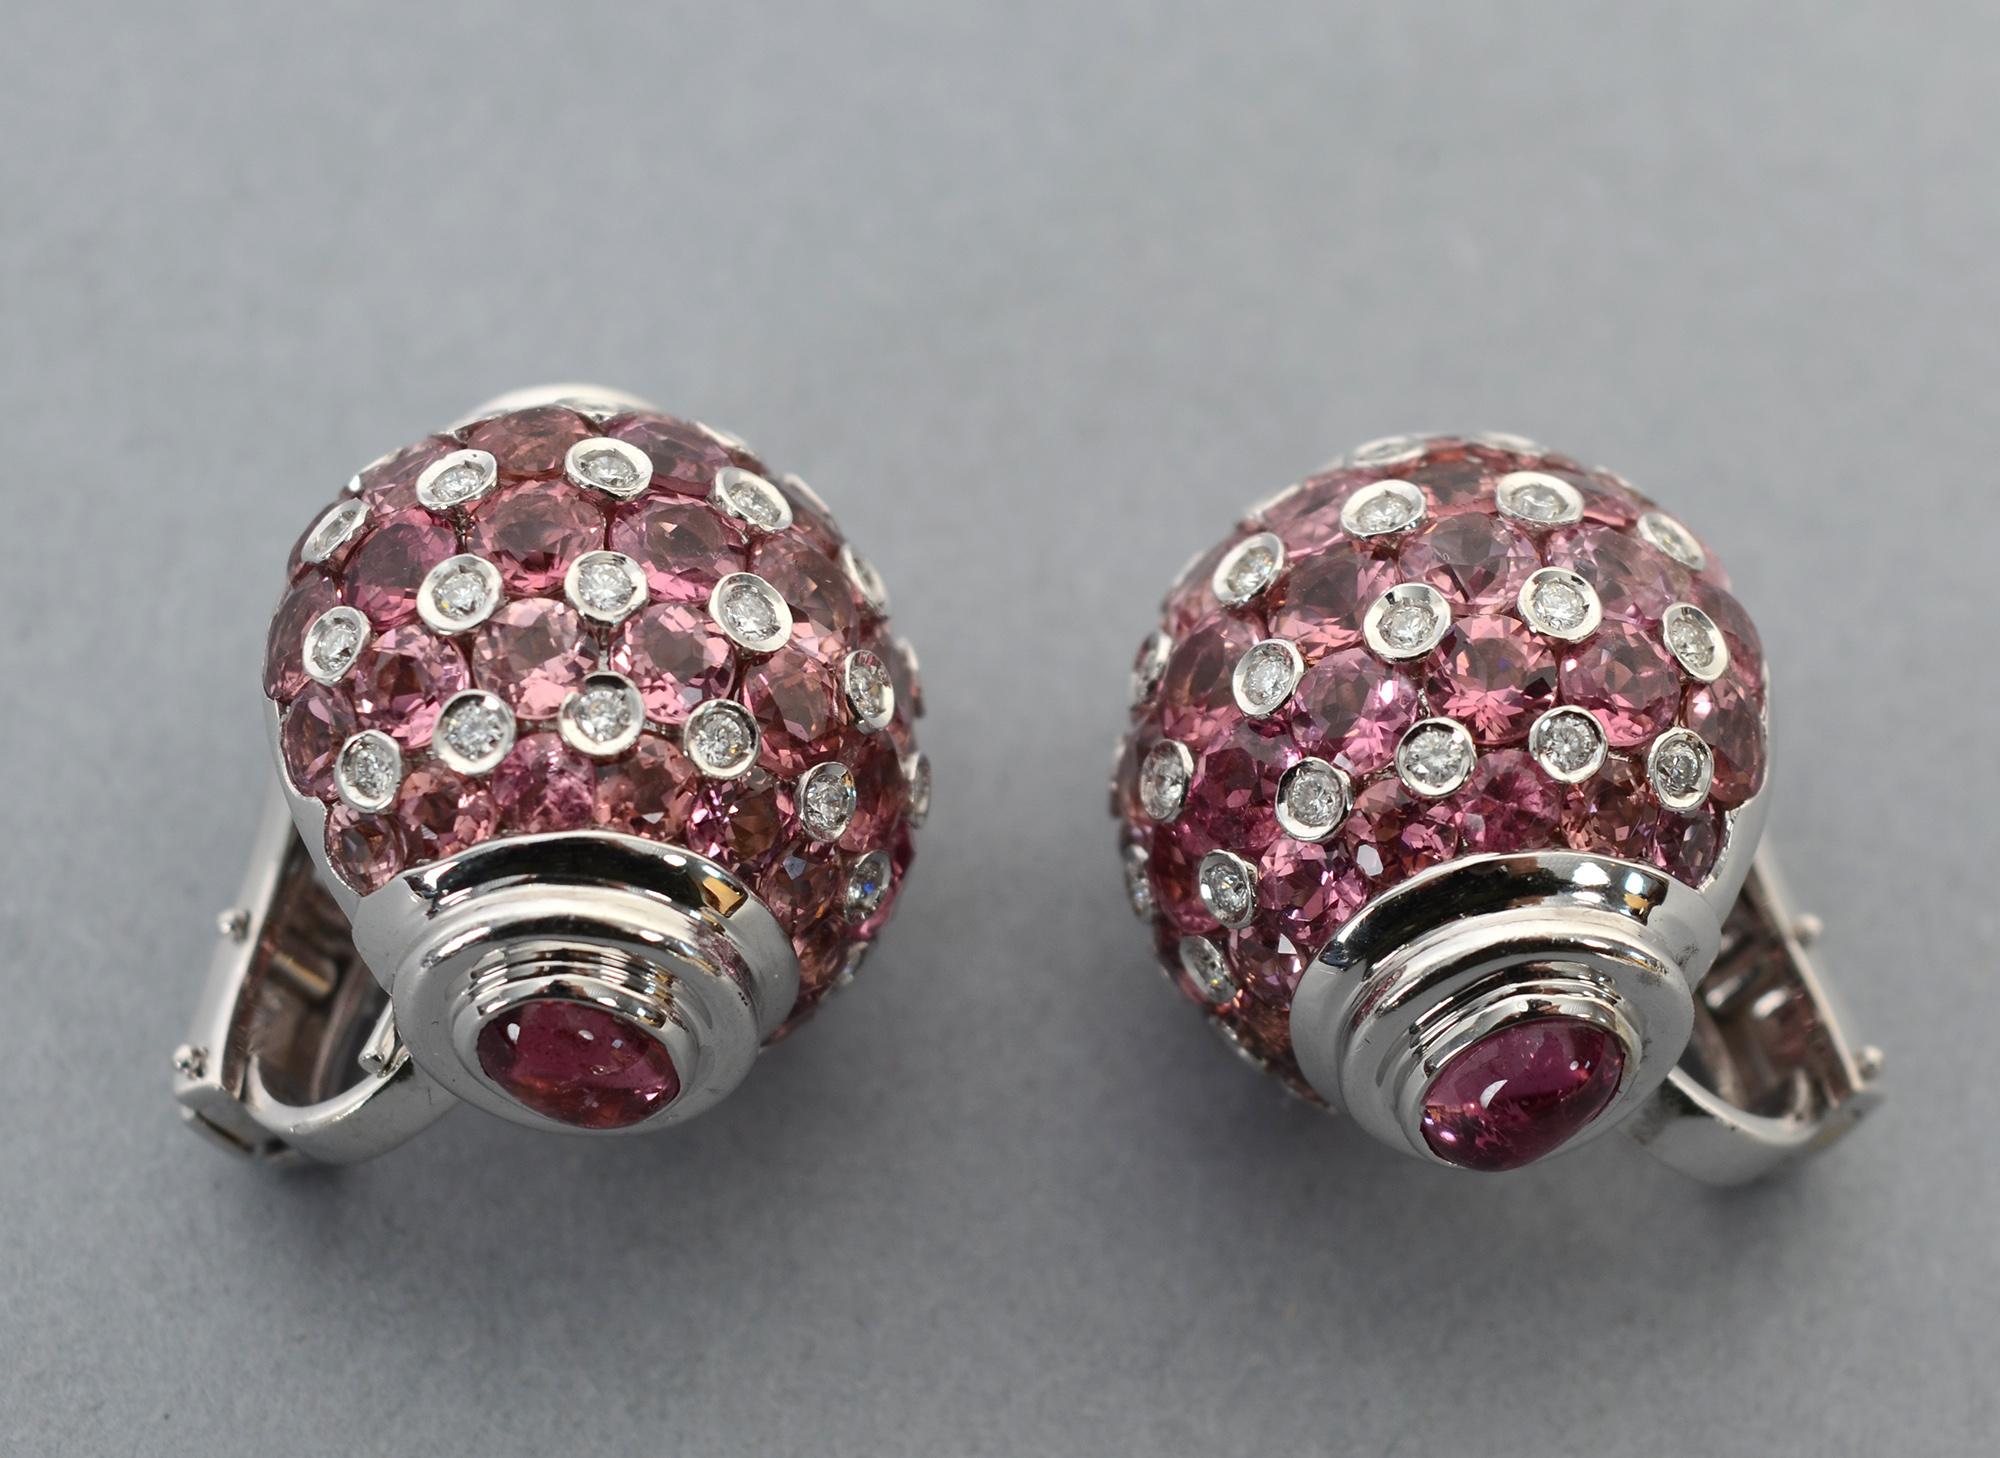 Showy, but not too, too - earrings of pink sapphire; tourmaline and diamond.
The body of the earrings alternate approximately 3 carats of diamonds with more than 6 carats of tourmaline. The top and bottom are oval pink sapphires. All are set in